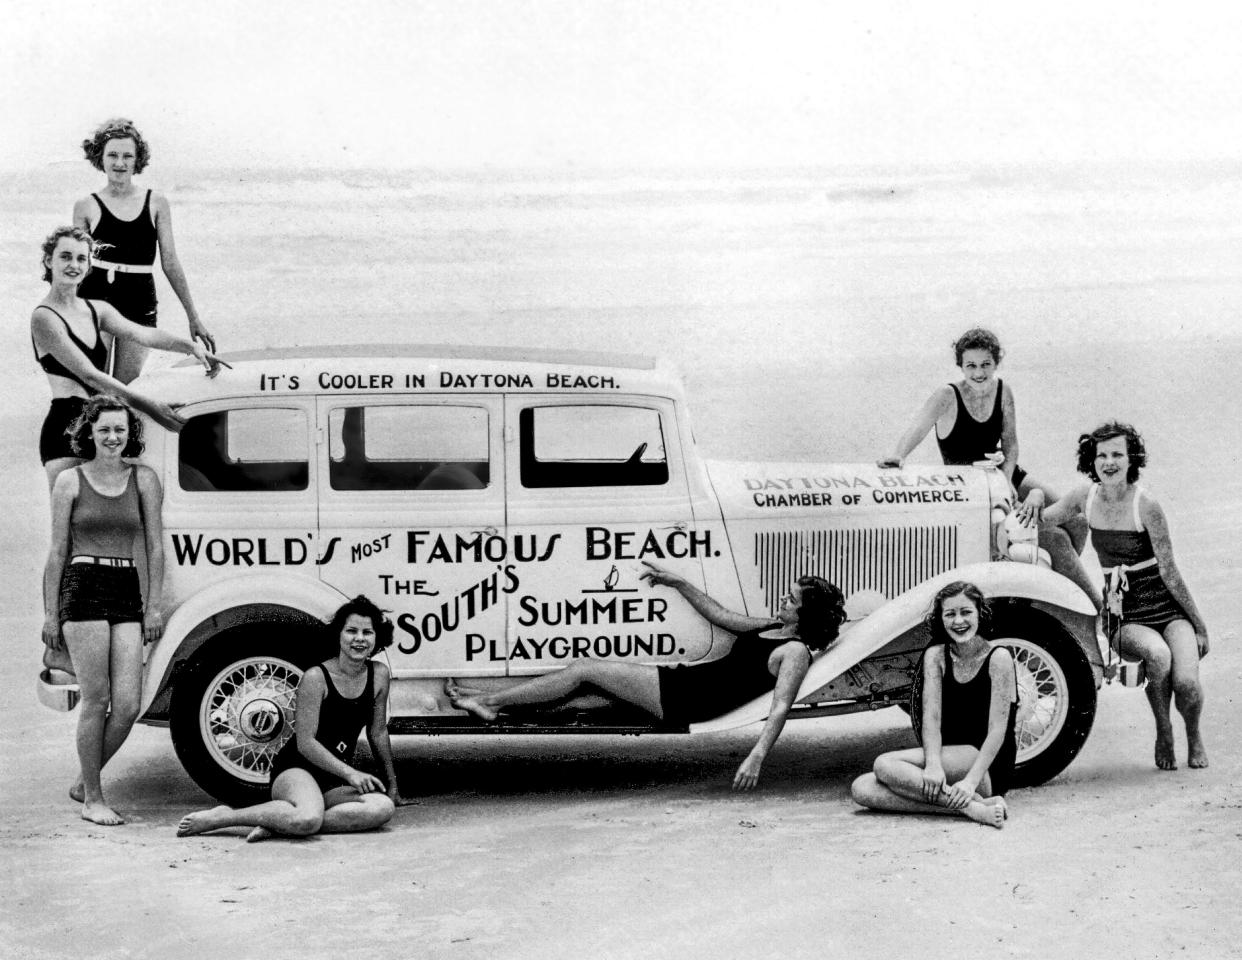 In this undated photo, the slogan "It's cooler in Daytona Beach" can be seen on a Chamber of Commerce car.